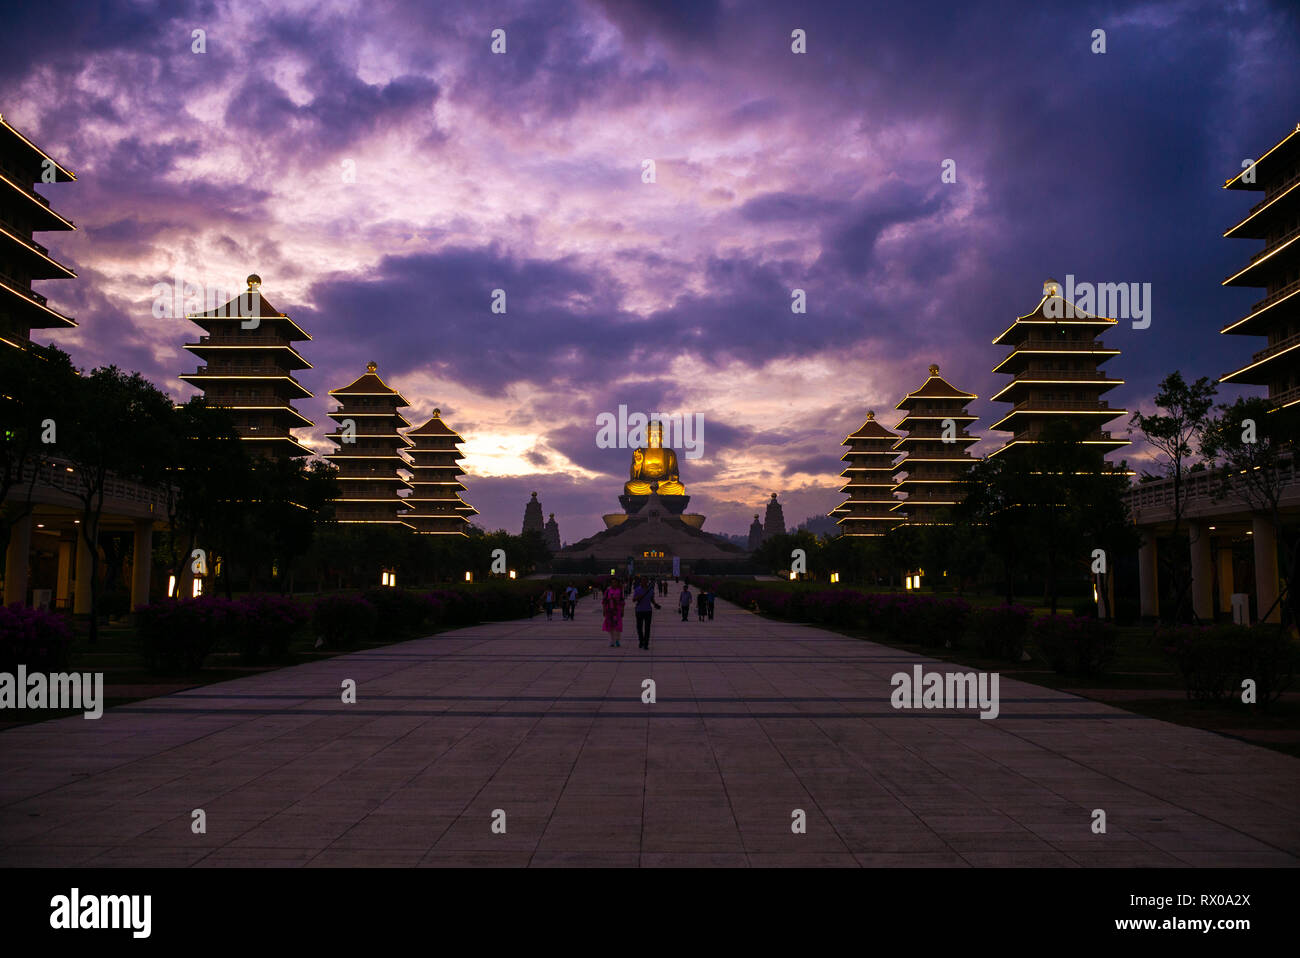 Fo Guang Shan - Largest Buddhist Monastery in Taiwan -  The enormous Shakyamuni Buddha at the end of a path of tourists under a dramatic sunset sky Stock Photo